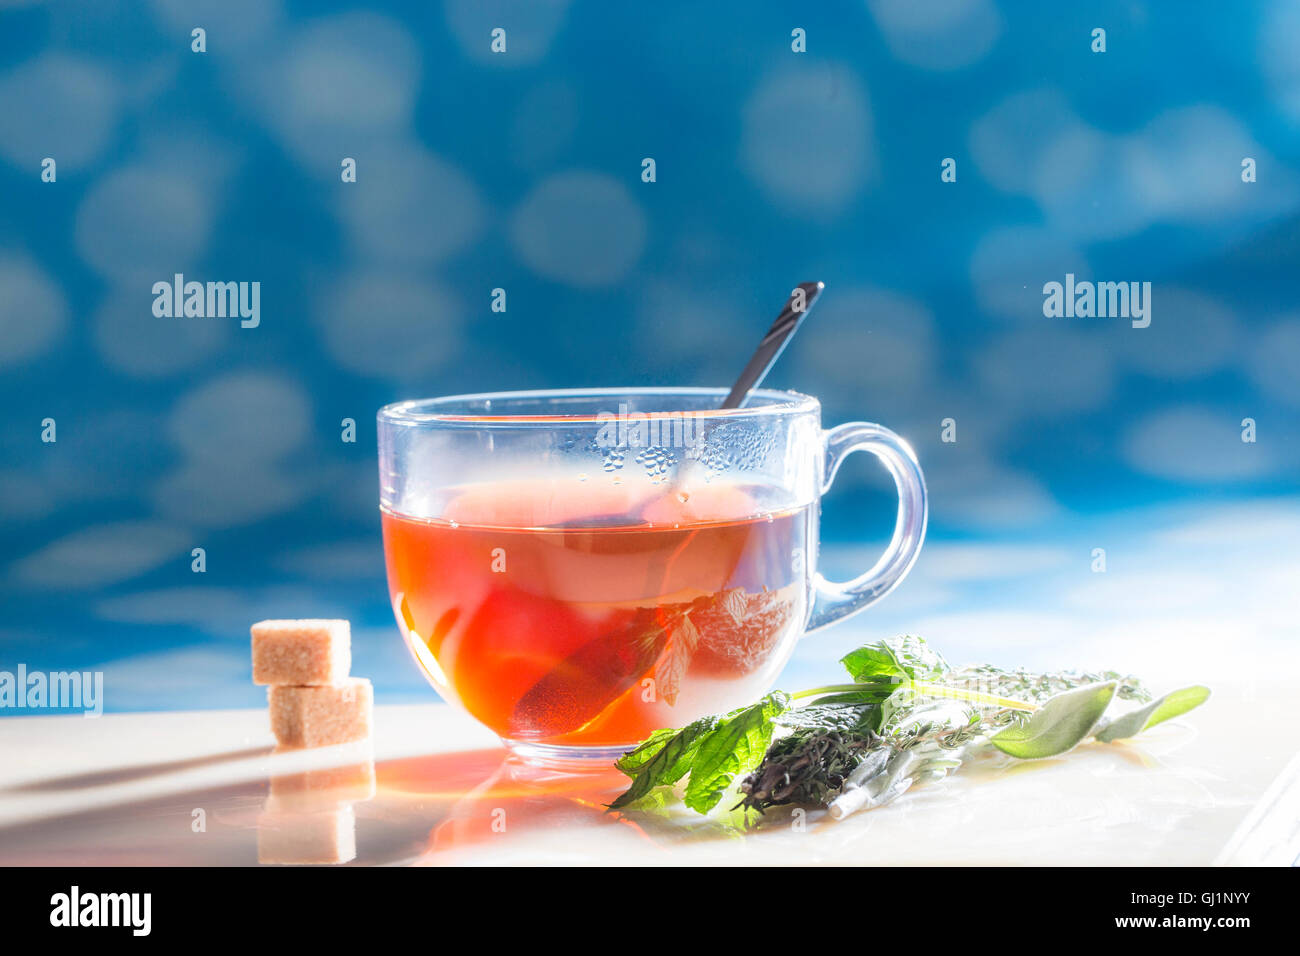 cup of tea with sugar and herbs at sunny day. Stock Photo